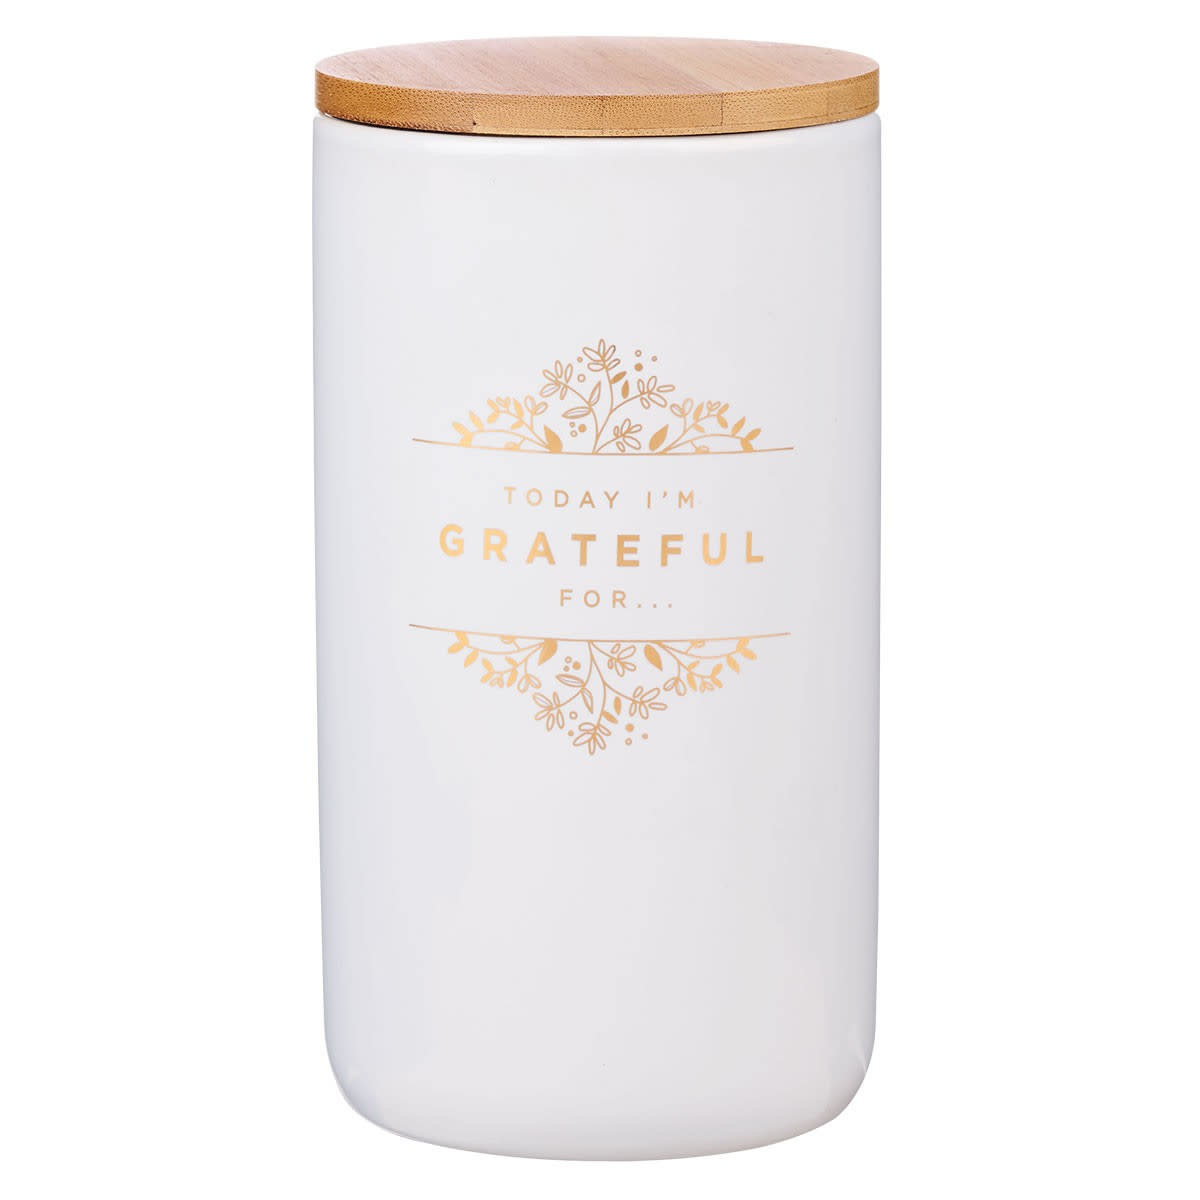 Today I'm Grateful For... Glass Gratitude Jar with Cards